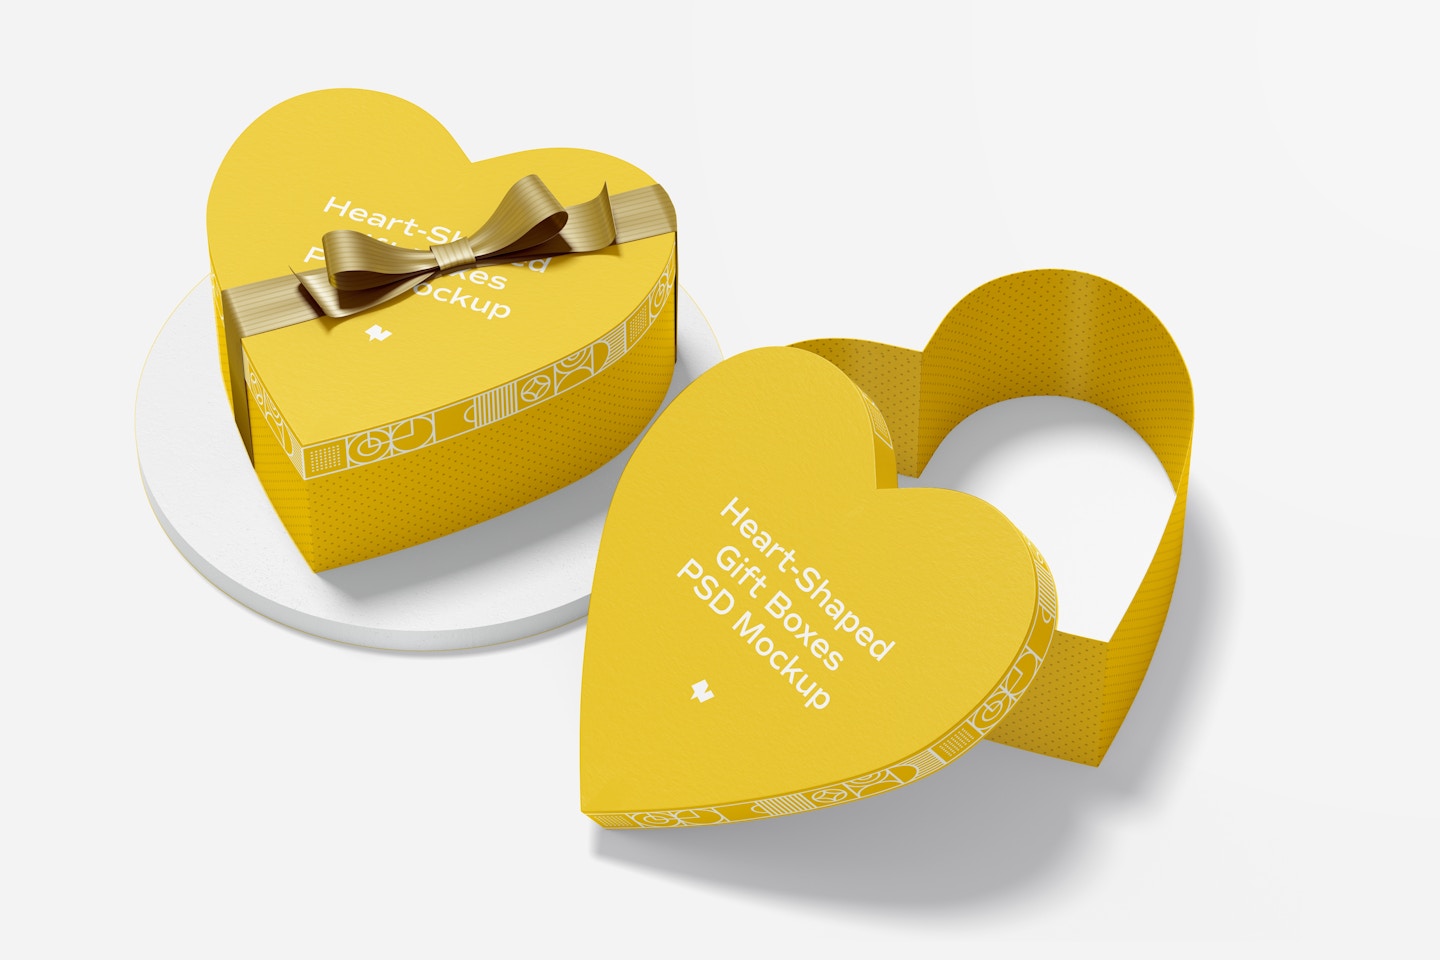 Heart-Shaped Gift Boxes With Paper Ribbon Mockup, Opened and Closed